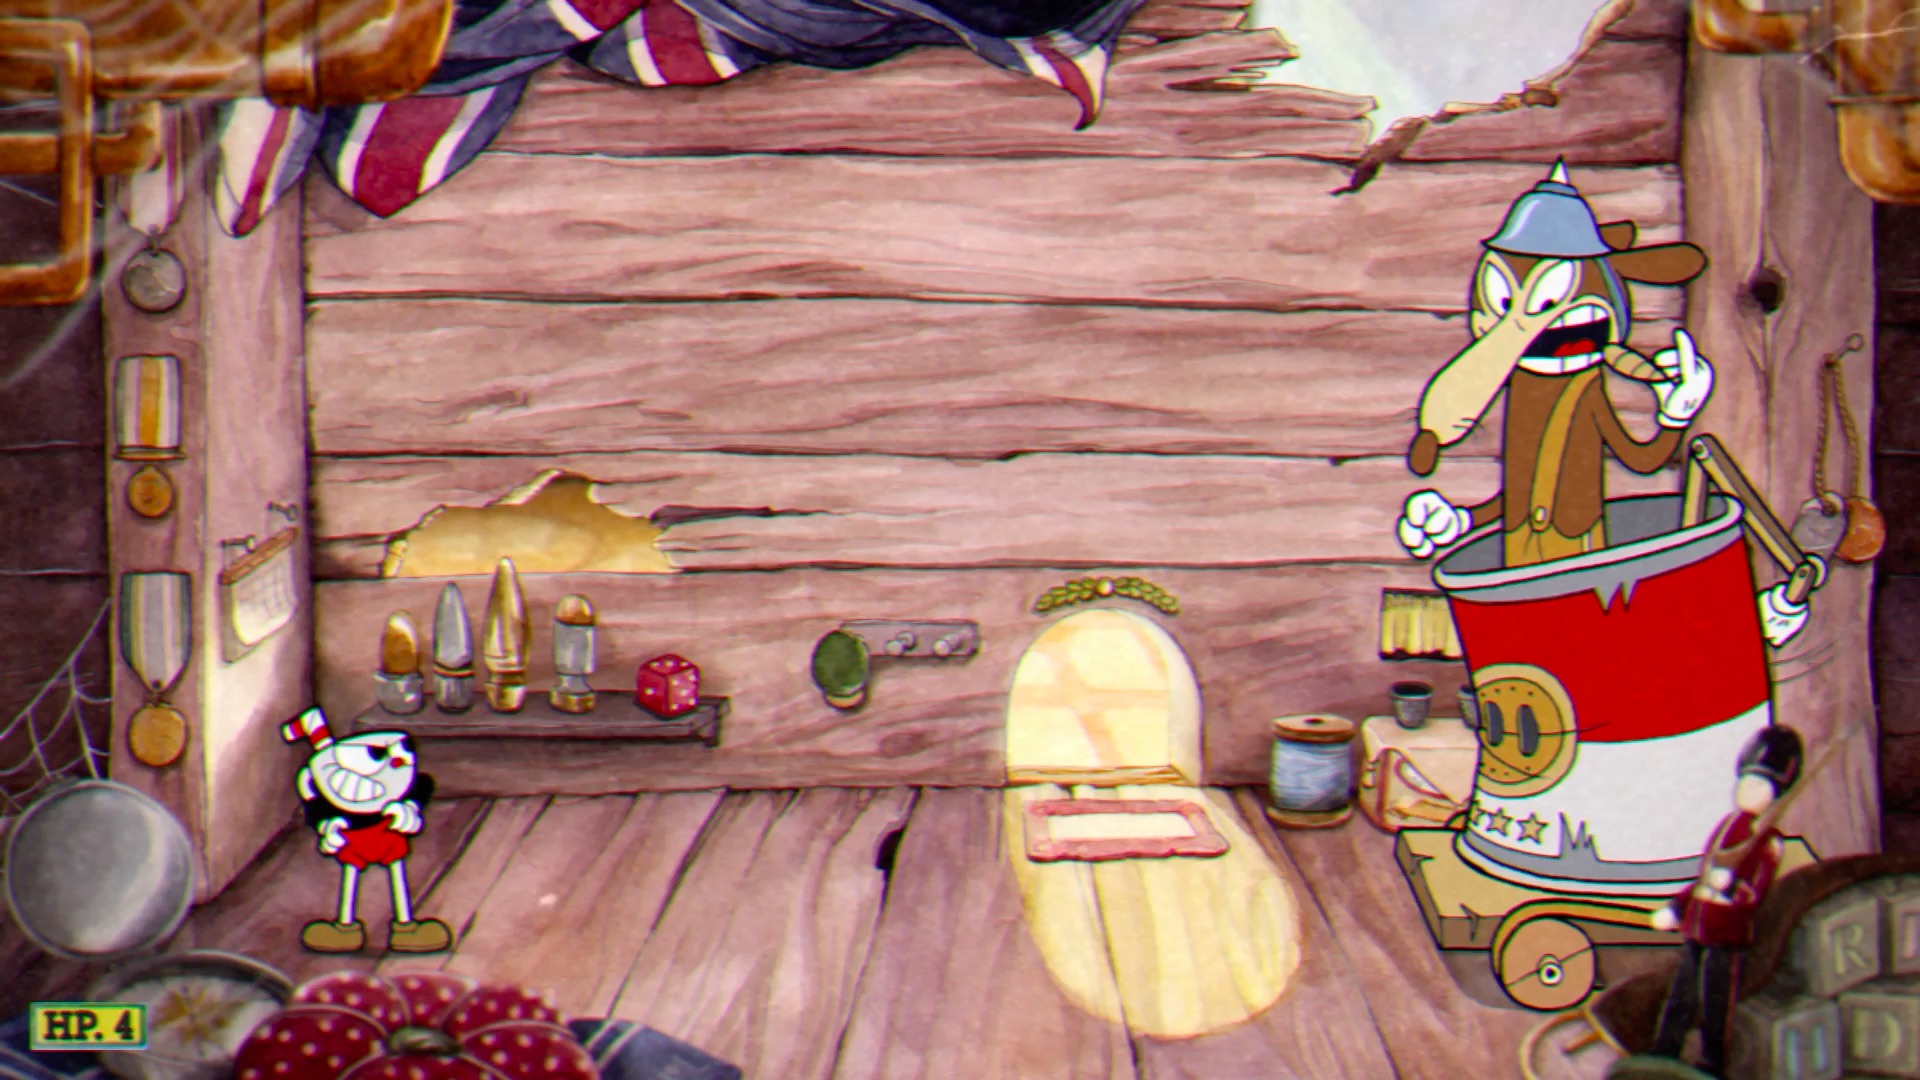 Netflix strikes video game gold with 'The Cuphead Show!' - The